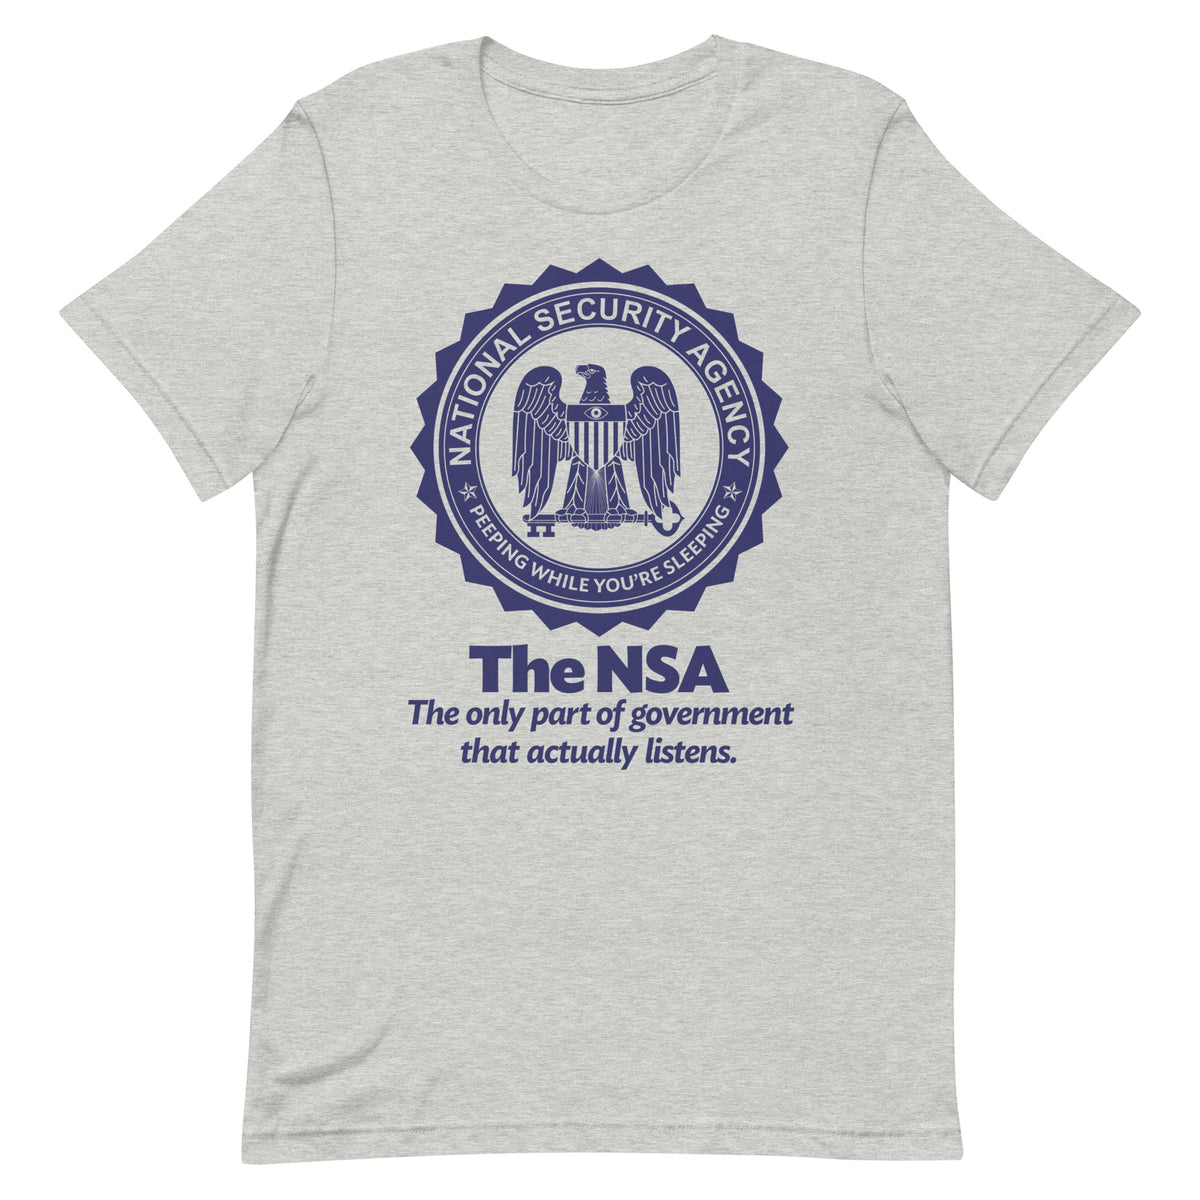 The NSA Shirt Made in the USA